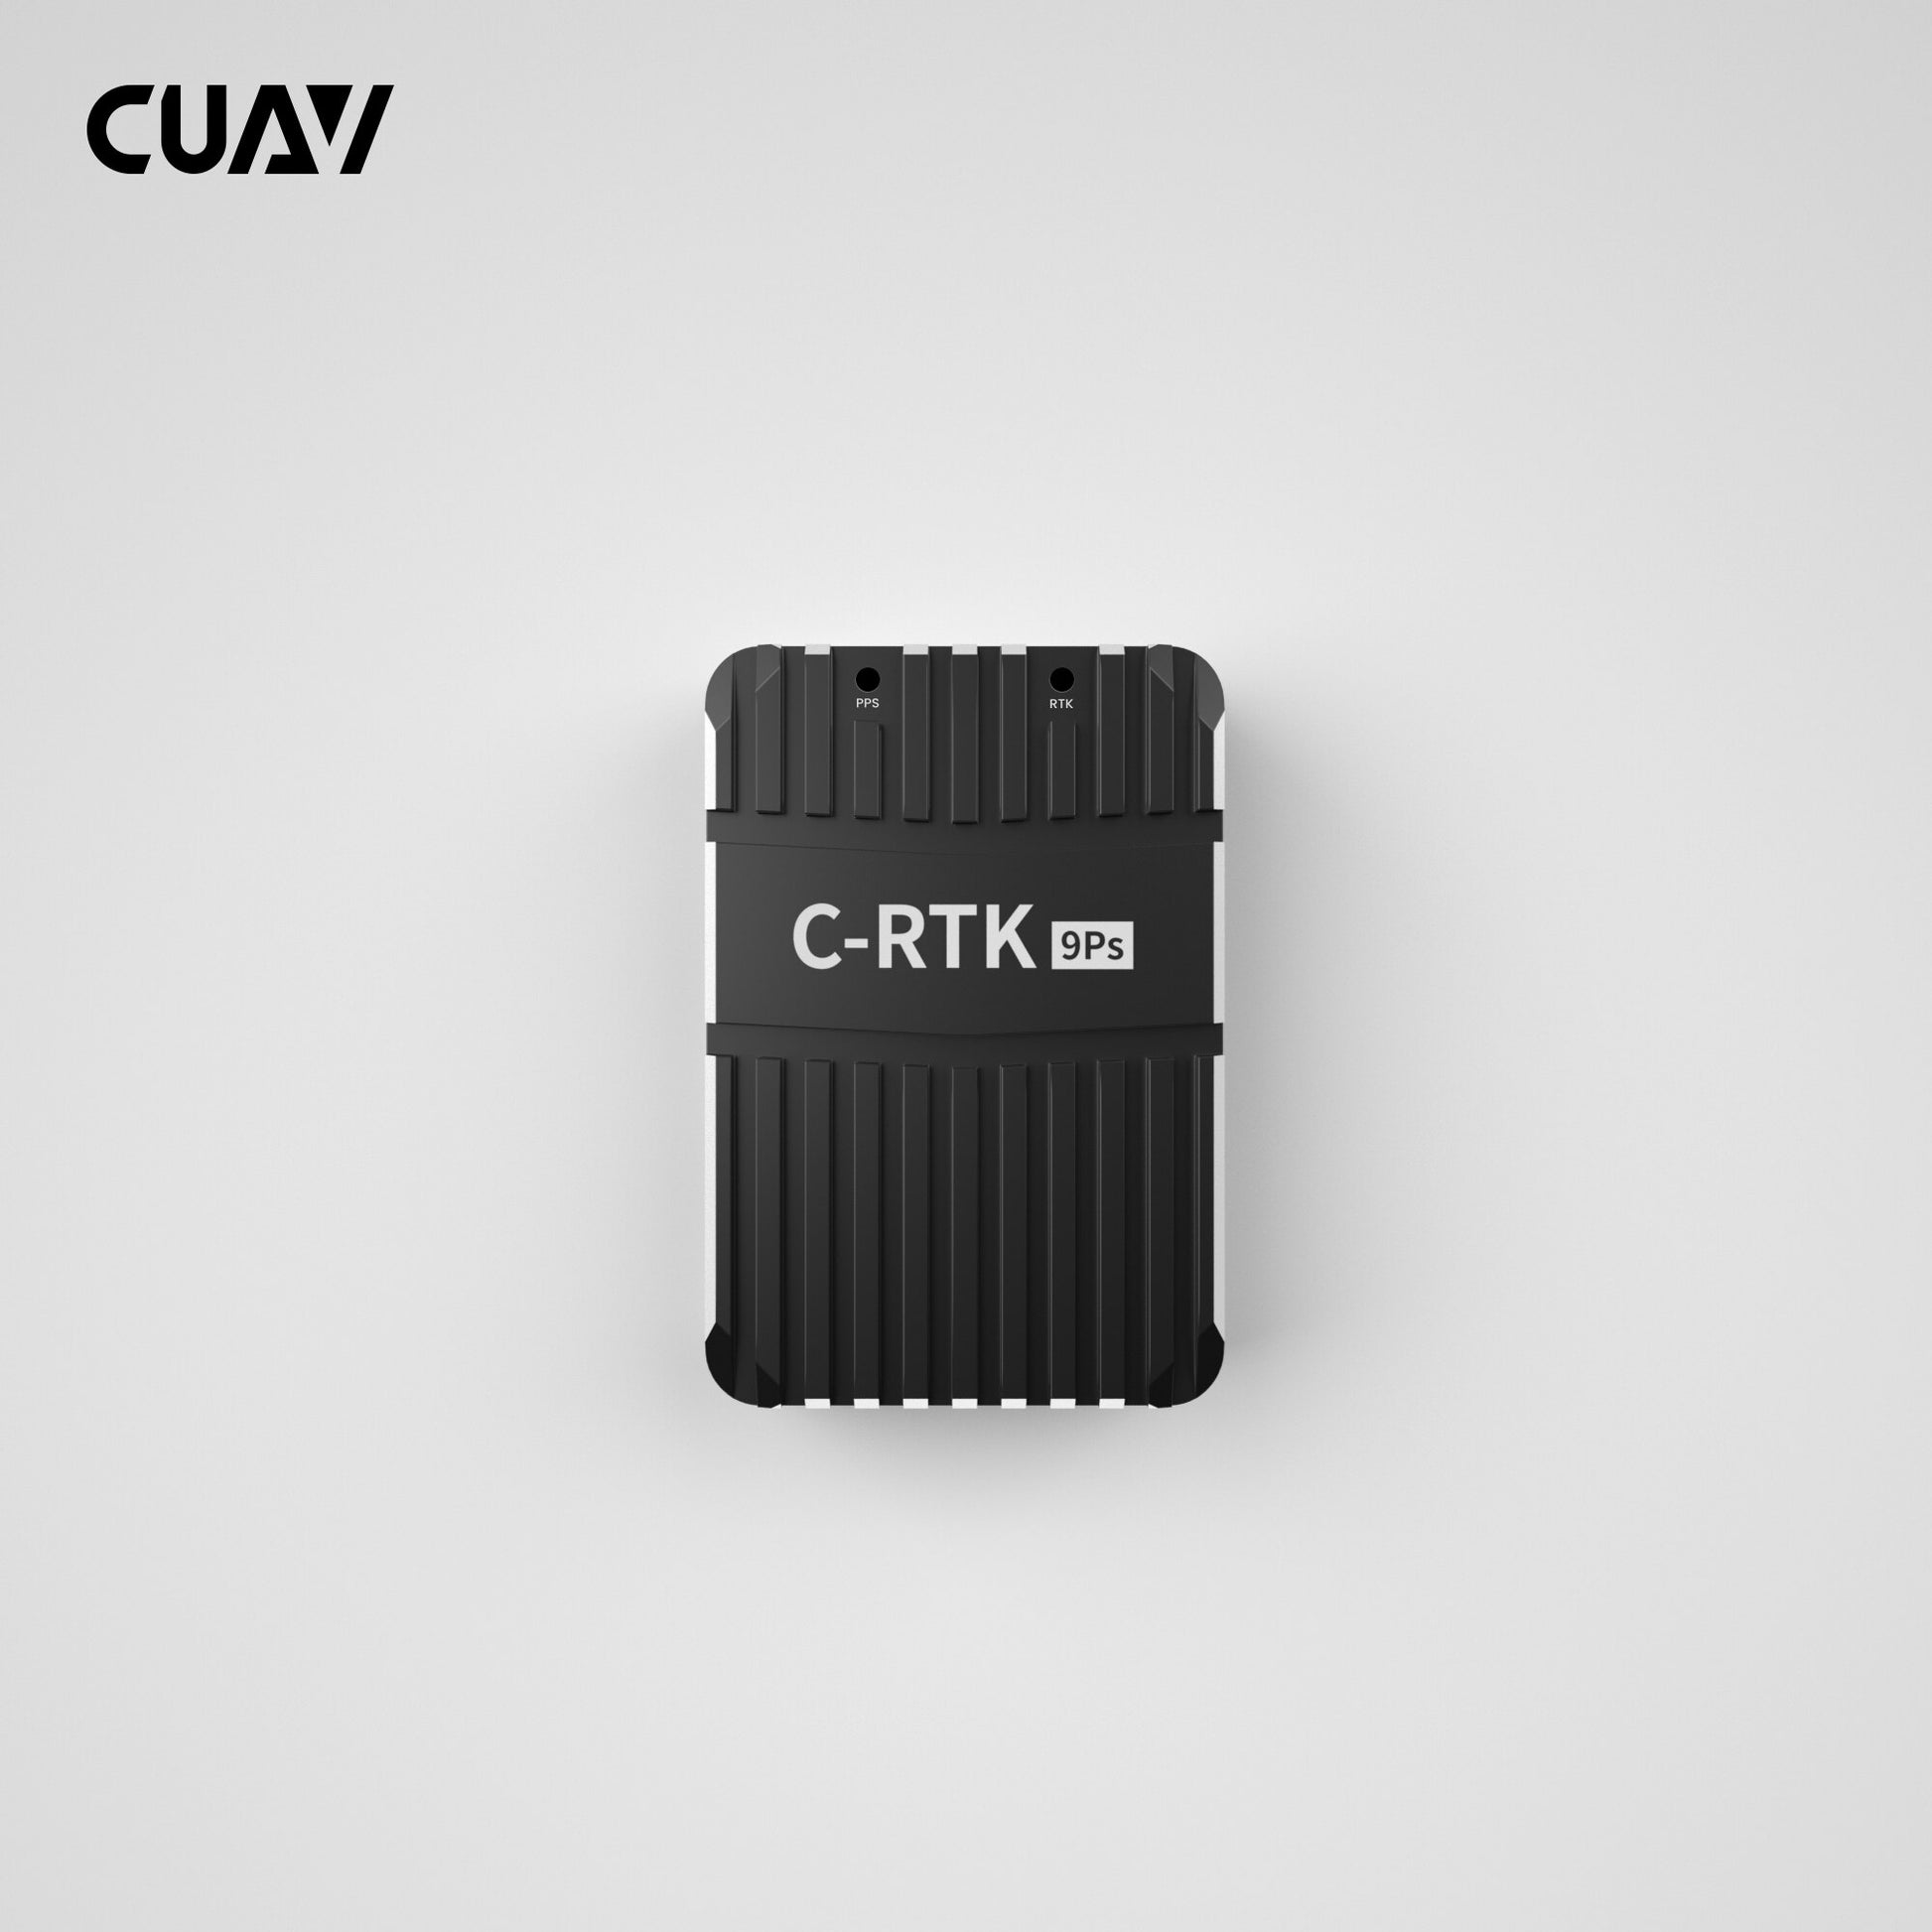 CUAV Dual RTK 9Ps Yaw With V5+ Flight Controller Sky Unit GPS Direction Finding And Positioning Package